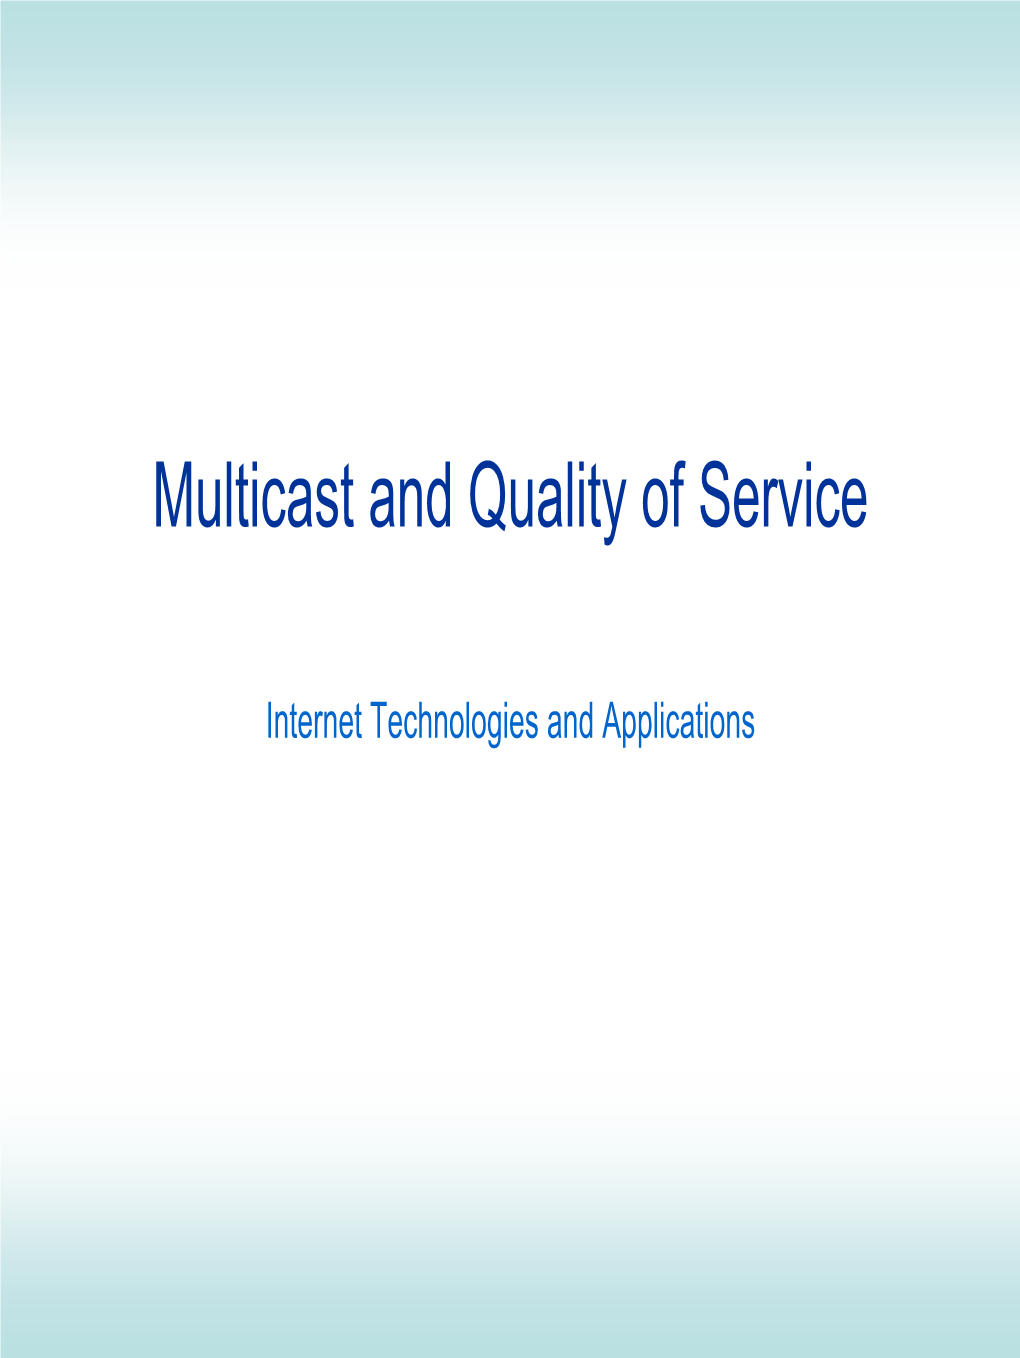 Multicast and Quality of Service